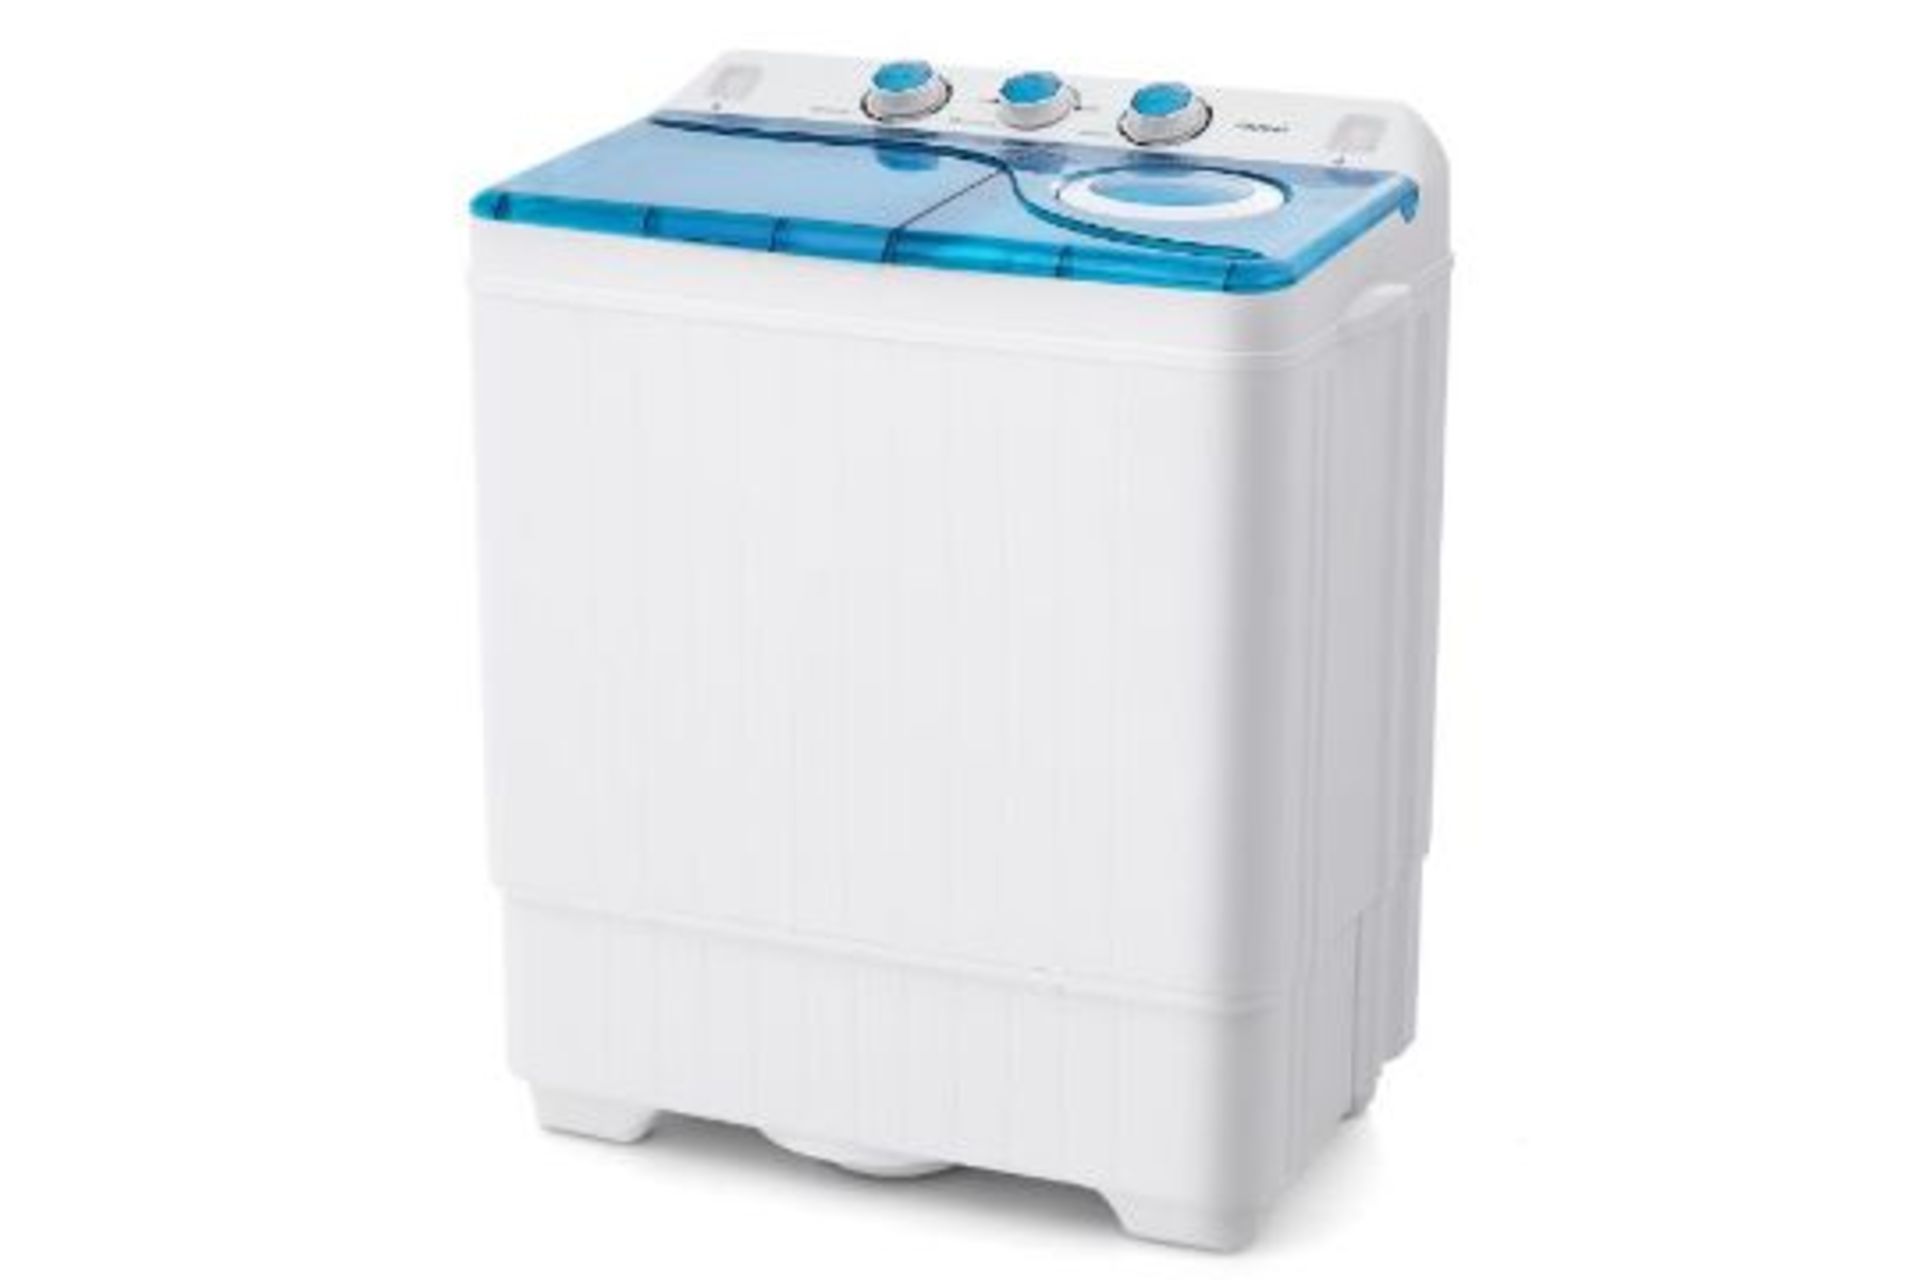 Portable Laundry Washer with Timing Function and Drain Pump. - E34. Powerful dual-motor makes your